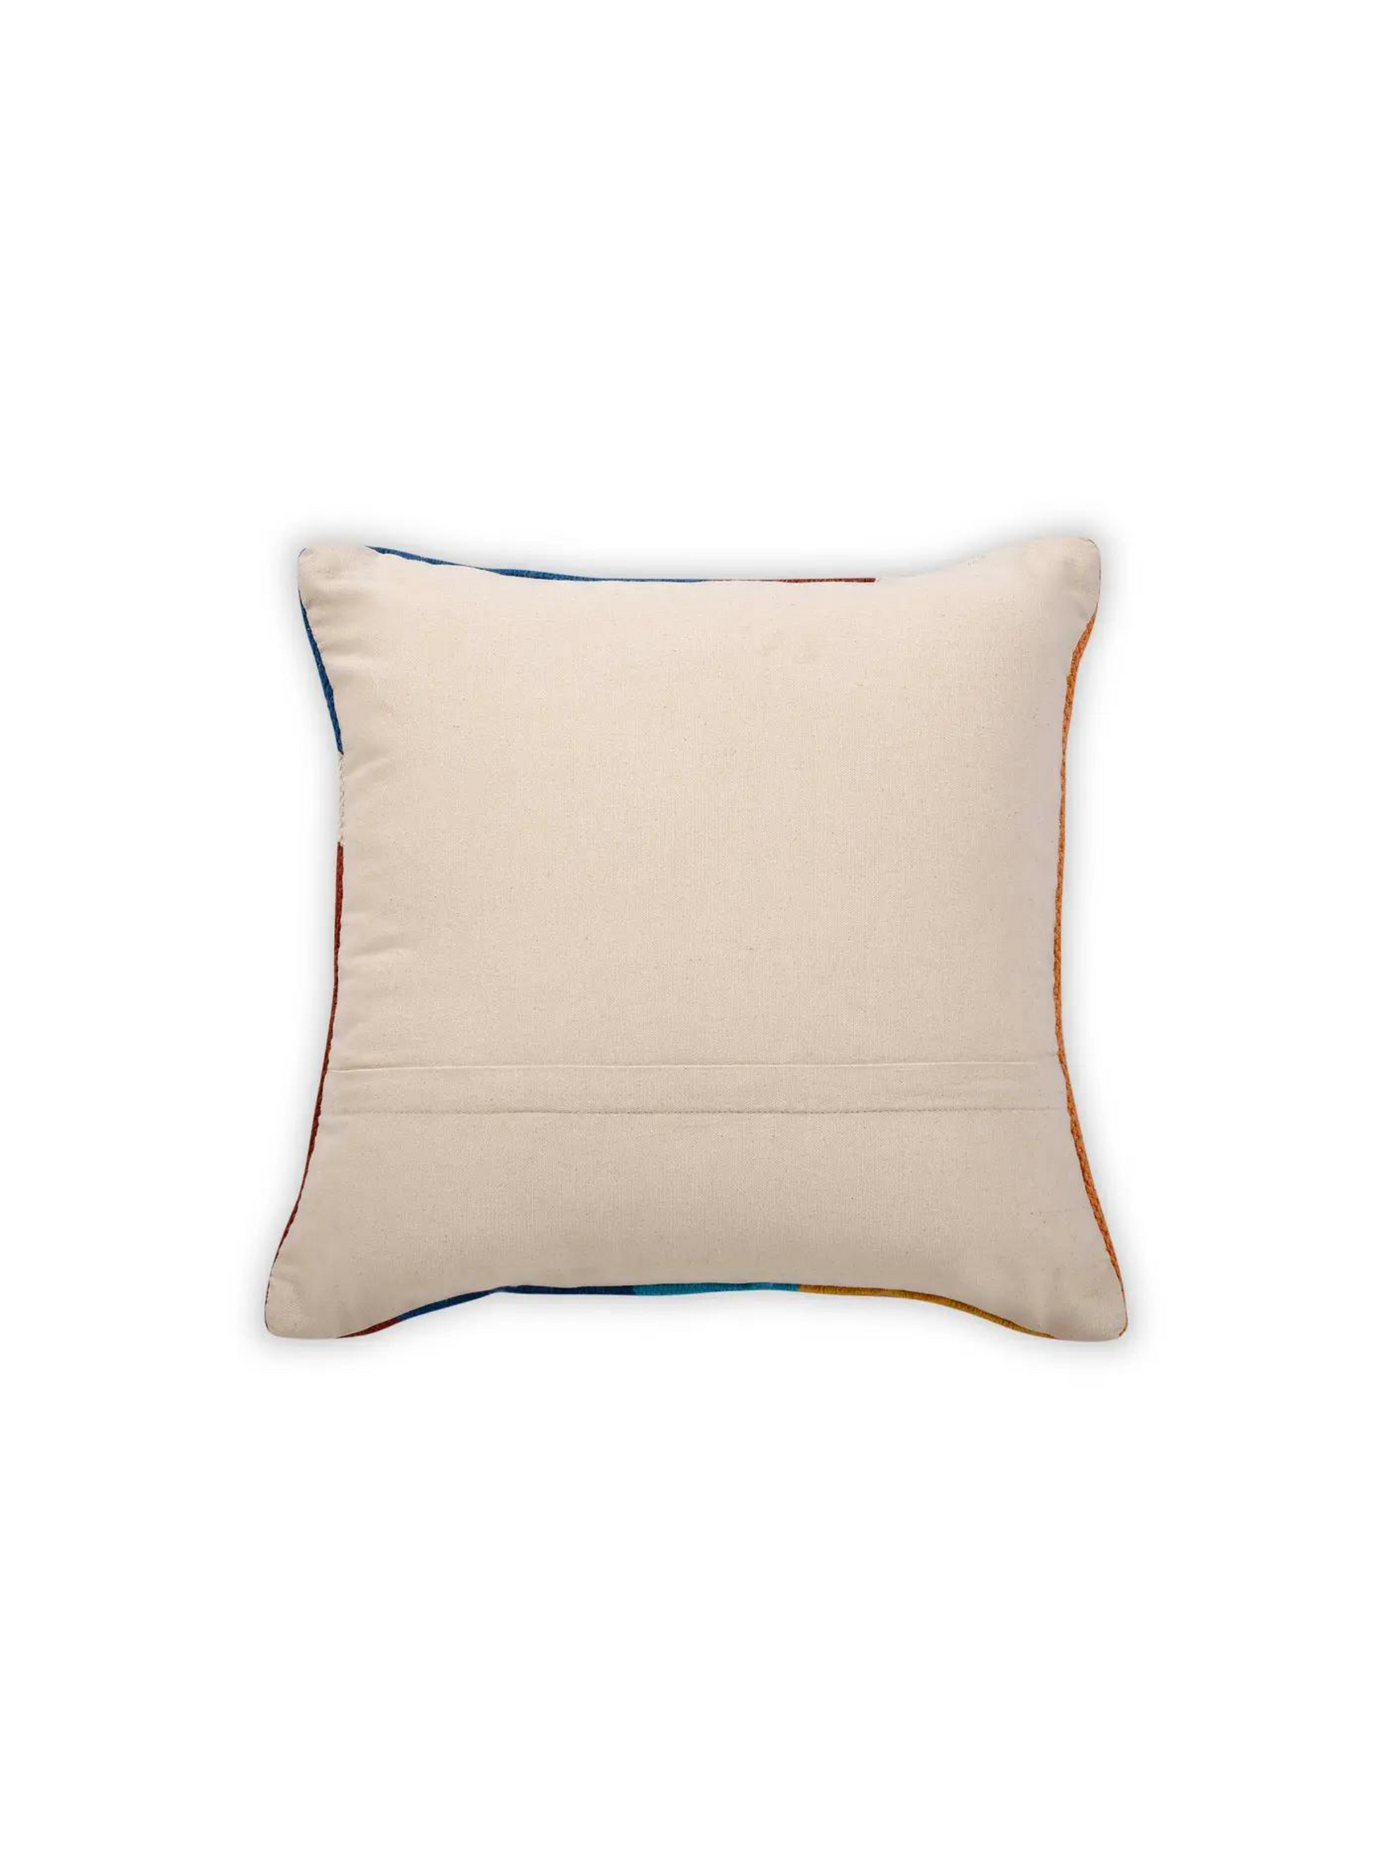 Ladakh Handcrafted Throw Pillow